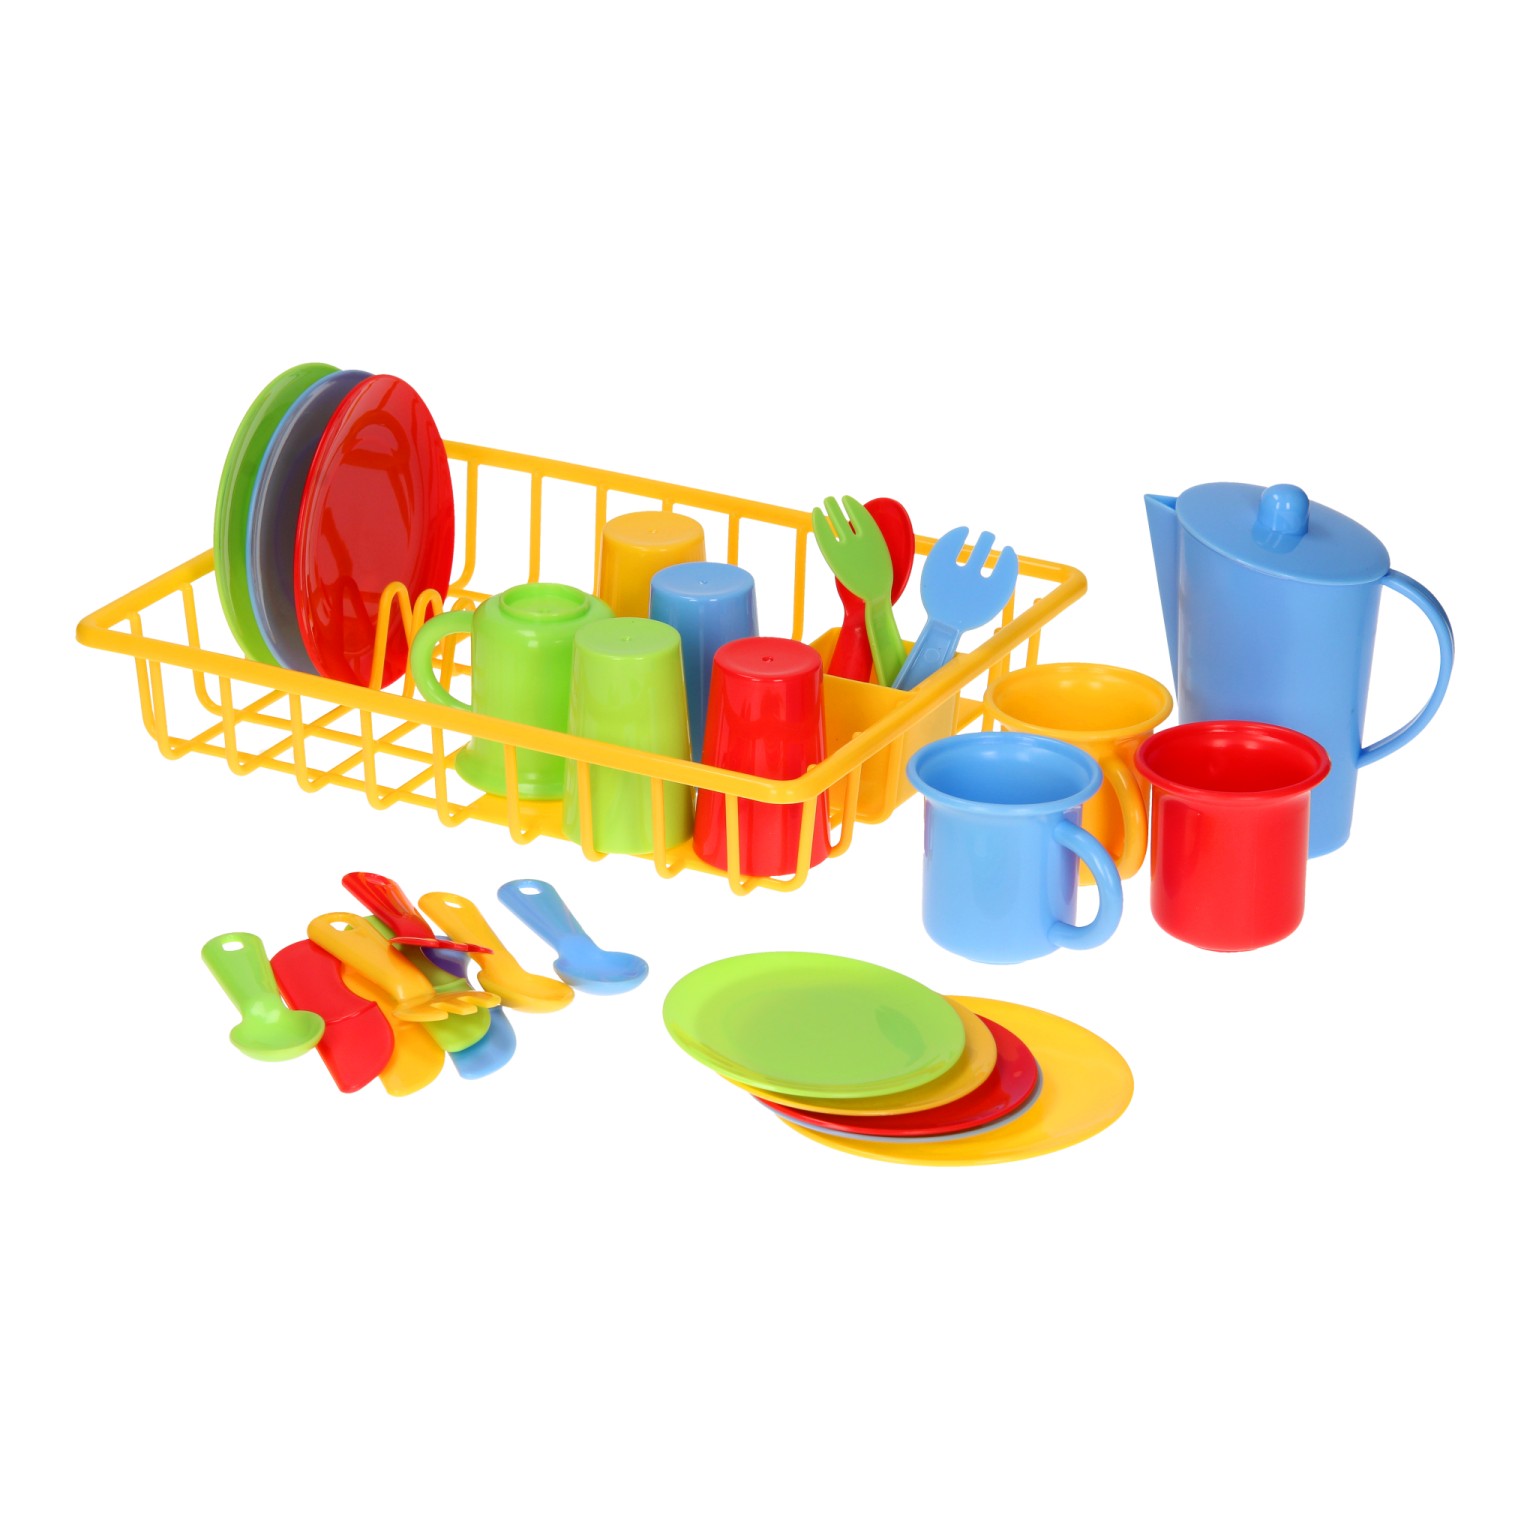 Kids Dish Washing Kitchen Set Toy Drainer Wash Roleplay Gift Play  Accessories